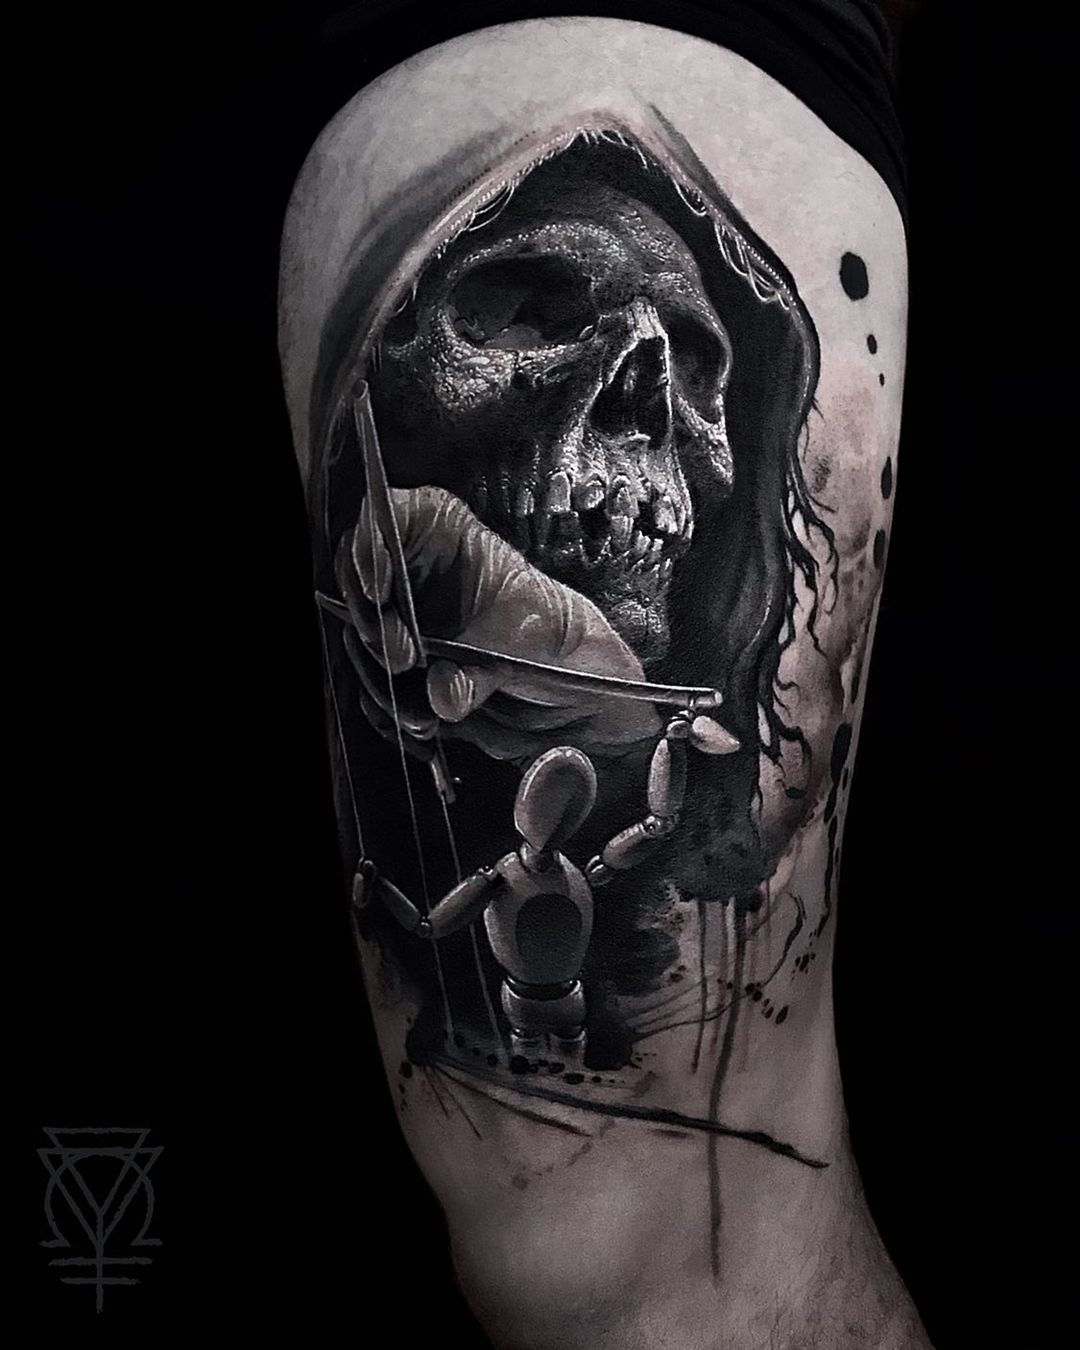 2022 New Dark Month Grim Reaper Hip Hop Waterproof Tattoo Stickers For  Woman Man So Cool Arm Thigh Body Temporary Tattoo - Temporary Tattoos -  AliExpress